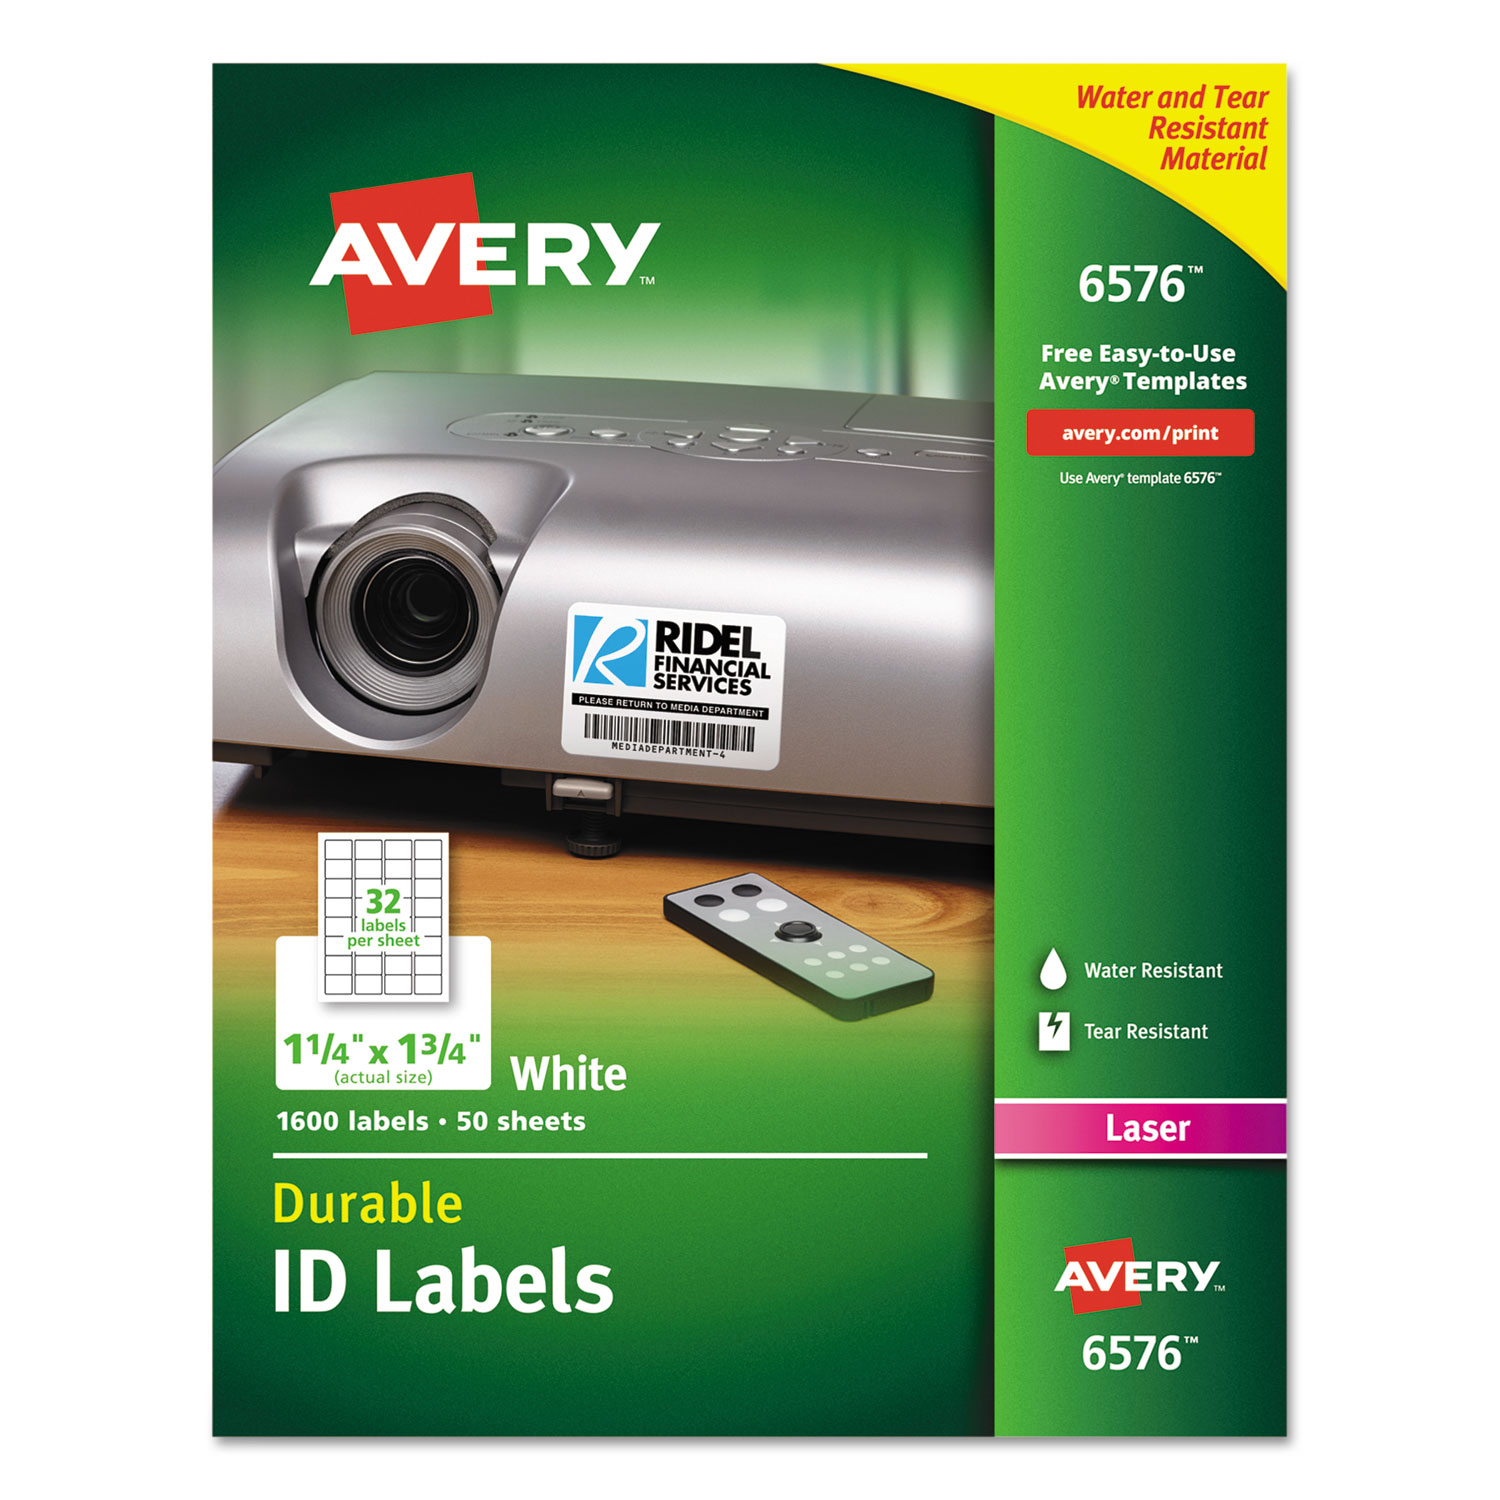  Avery 06576 Durable Permanent ID Labels with TrueBlock Technology, Laser Printers, 1.25 x 1.75, White, 32/Sheet, 50 Sheets/Pack (AVE6576) 